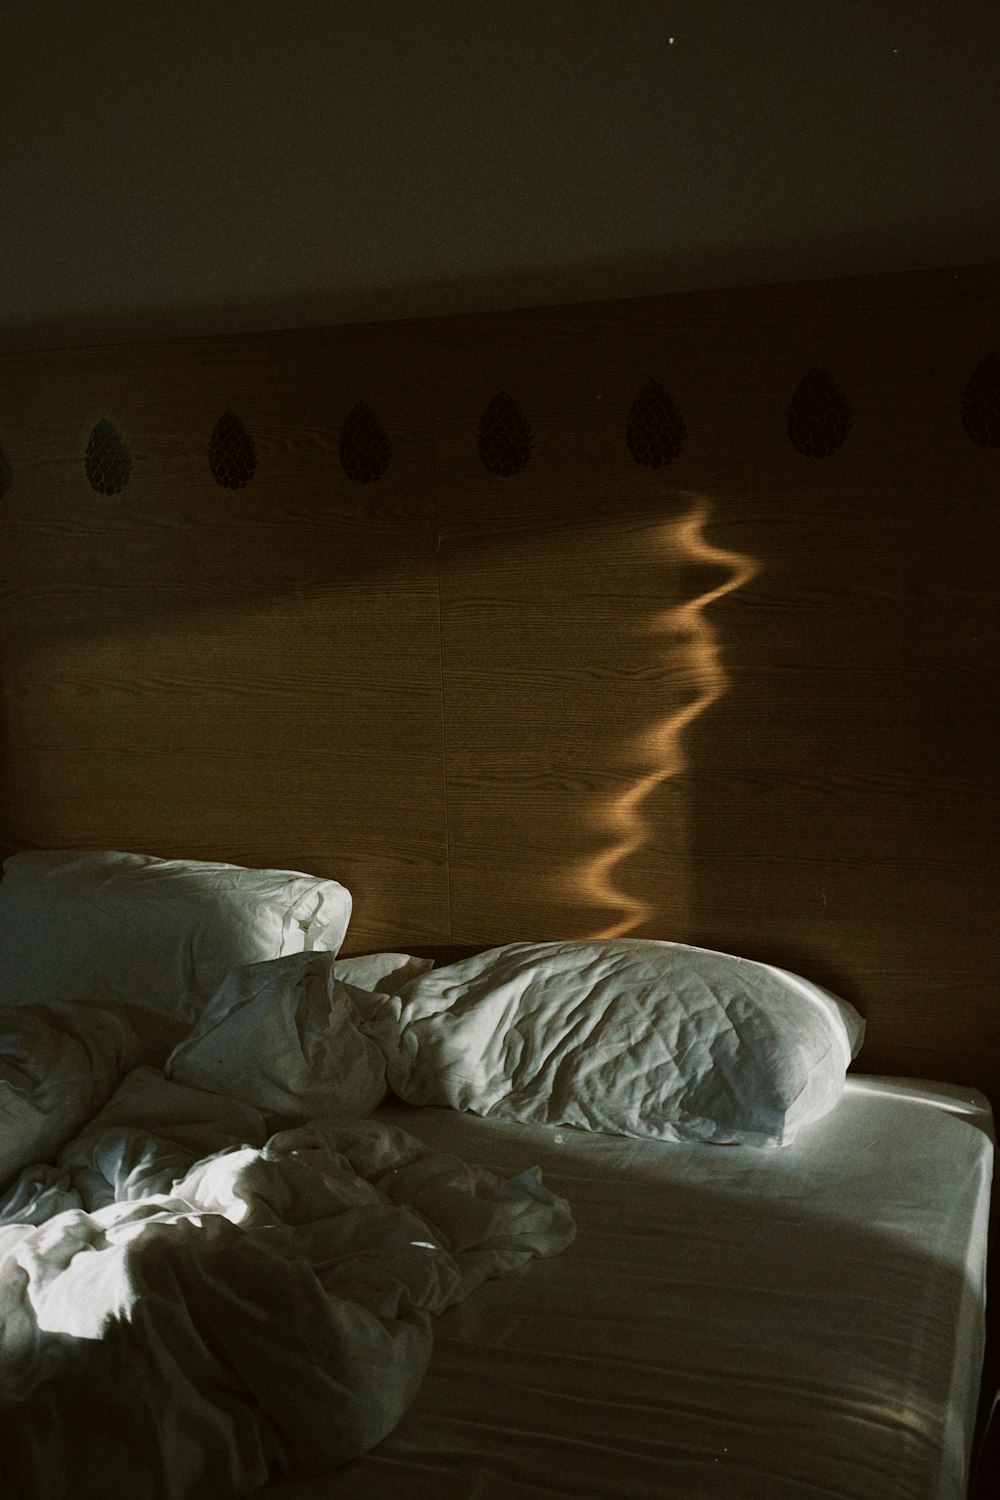 a bed with white sheets and a wooden headboard